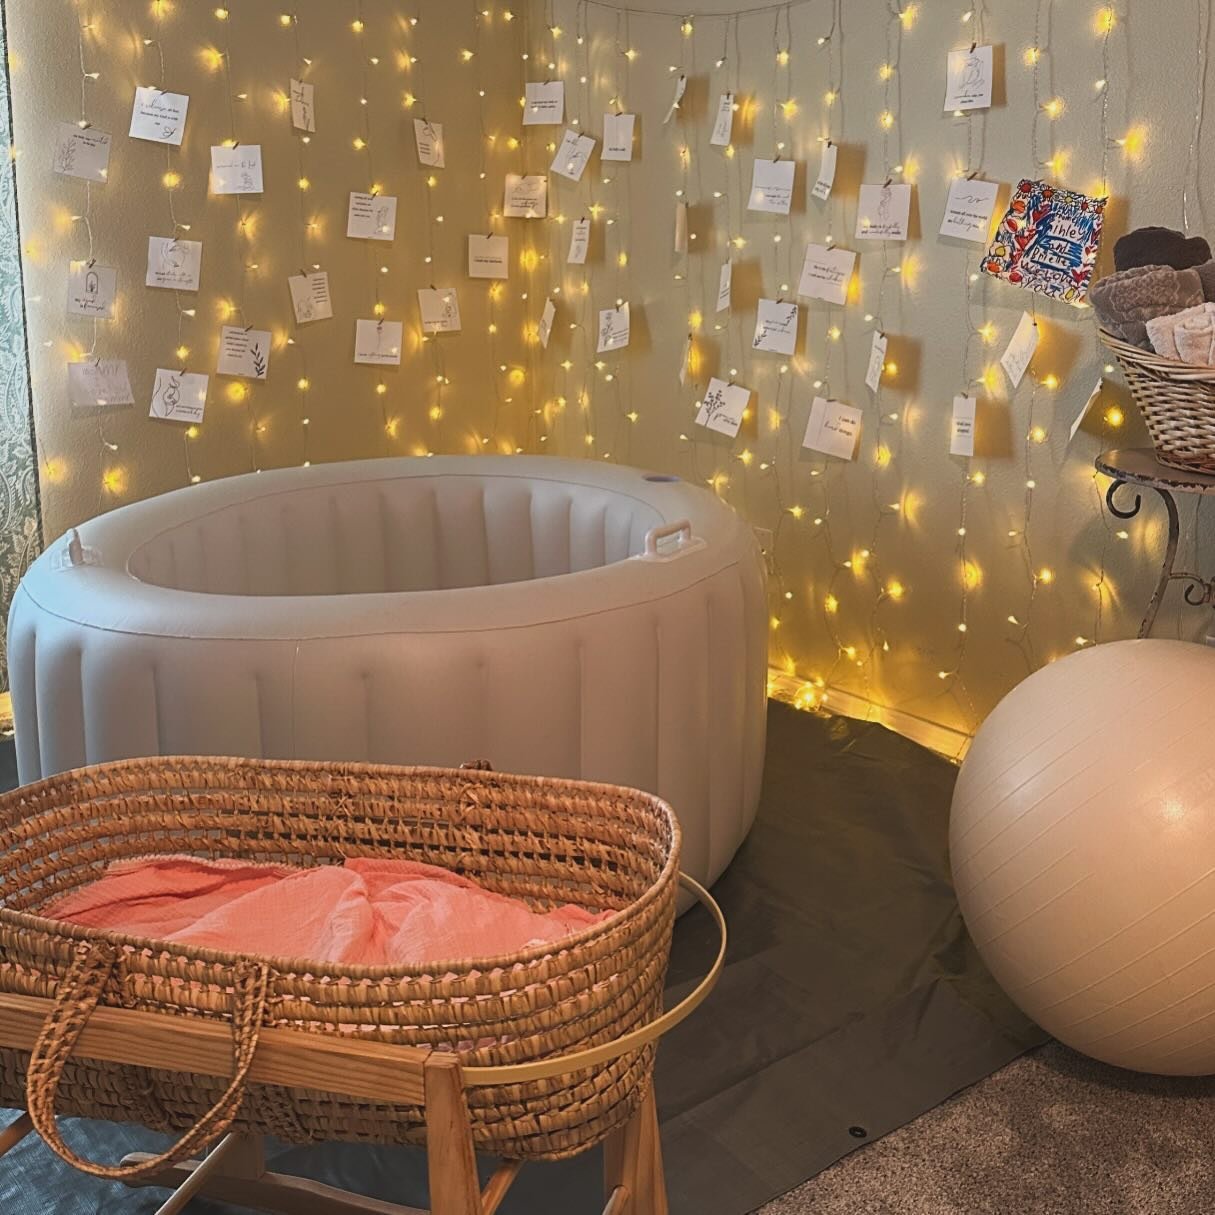 This is what a Homebirth space can look like ✨ You can welcome your baby calmly, gently in your home with skilled midwives by your side. Treasure Valley has amazing midwives who would love to support you and answer your questions about having your ba